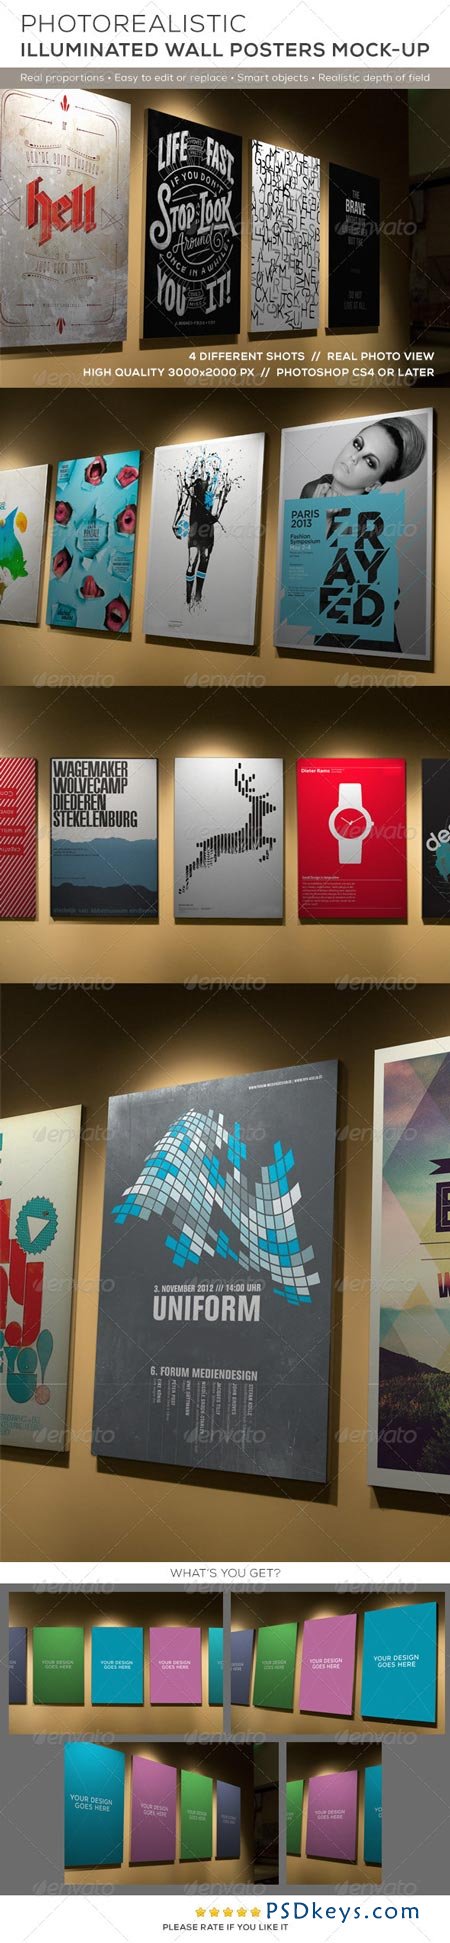 Posters Mock-up on Illuminated Wall 8517184